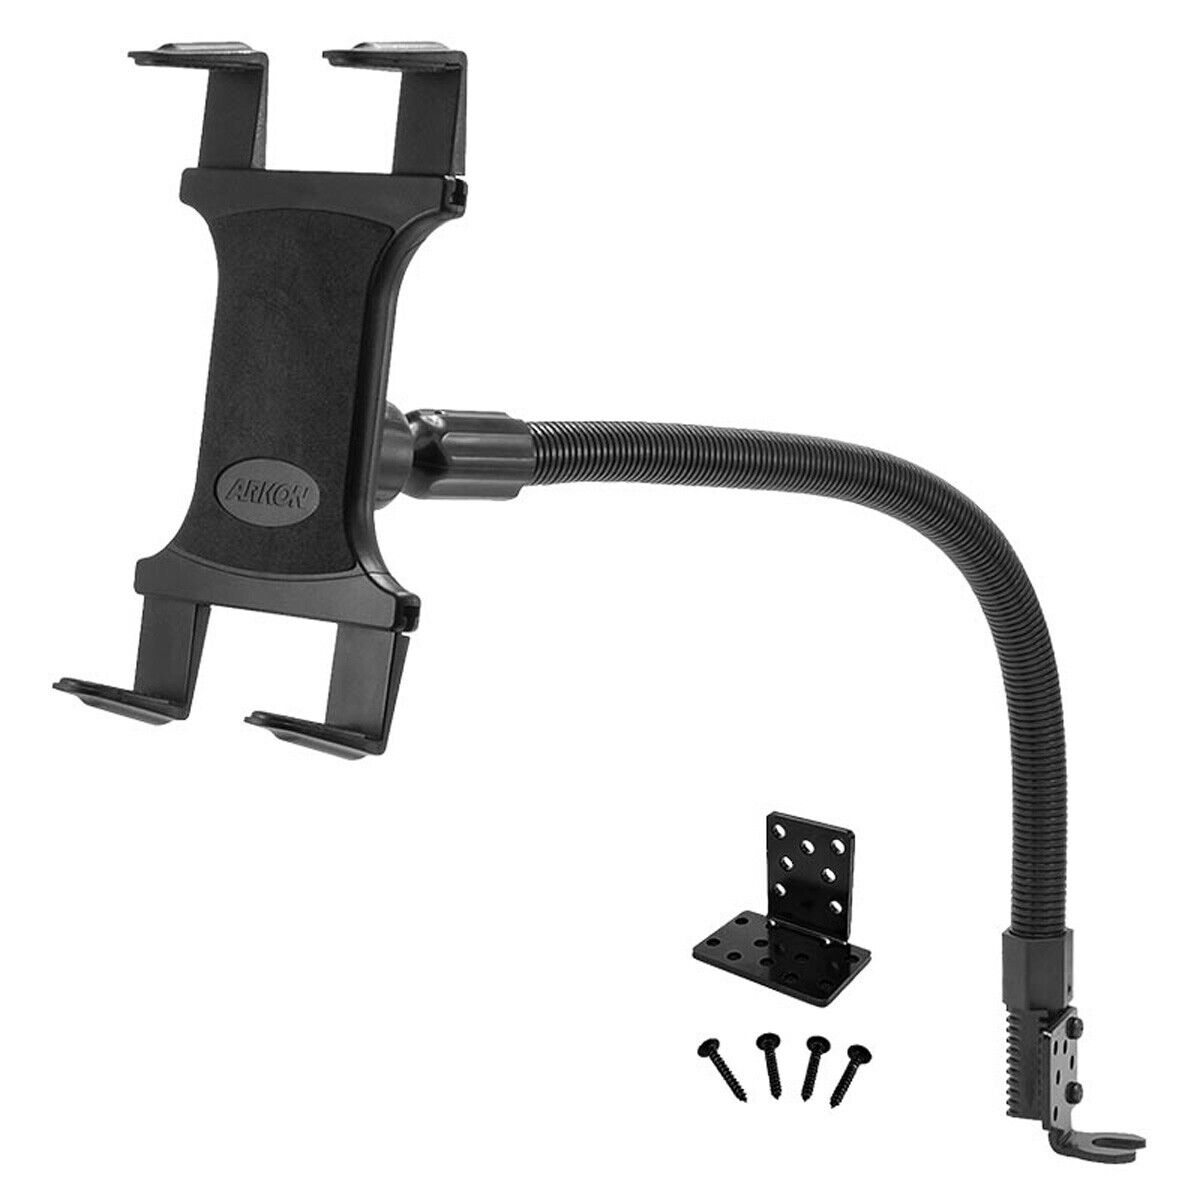 Arkon Car or Truck Seat Rail Inventory cleanup selling sale Mount inch Tablet with 22 Max 70% OFF Floor